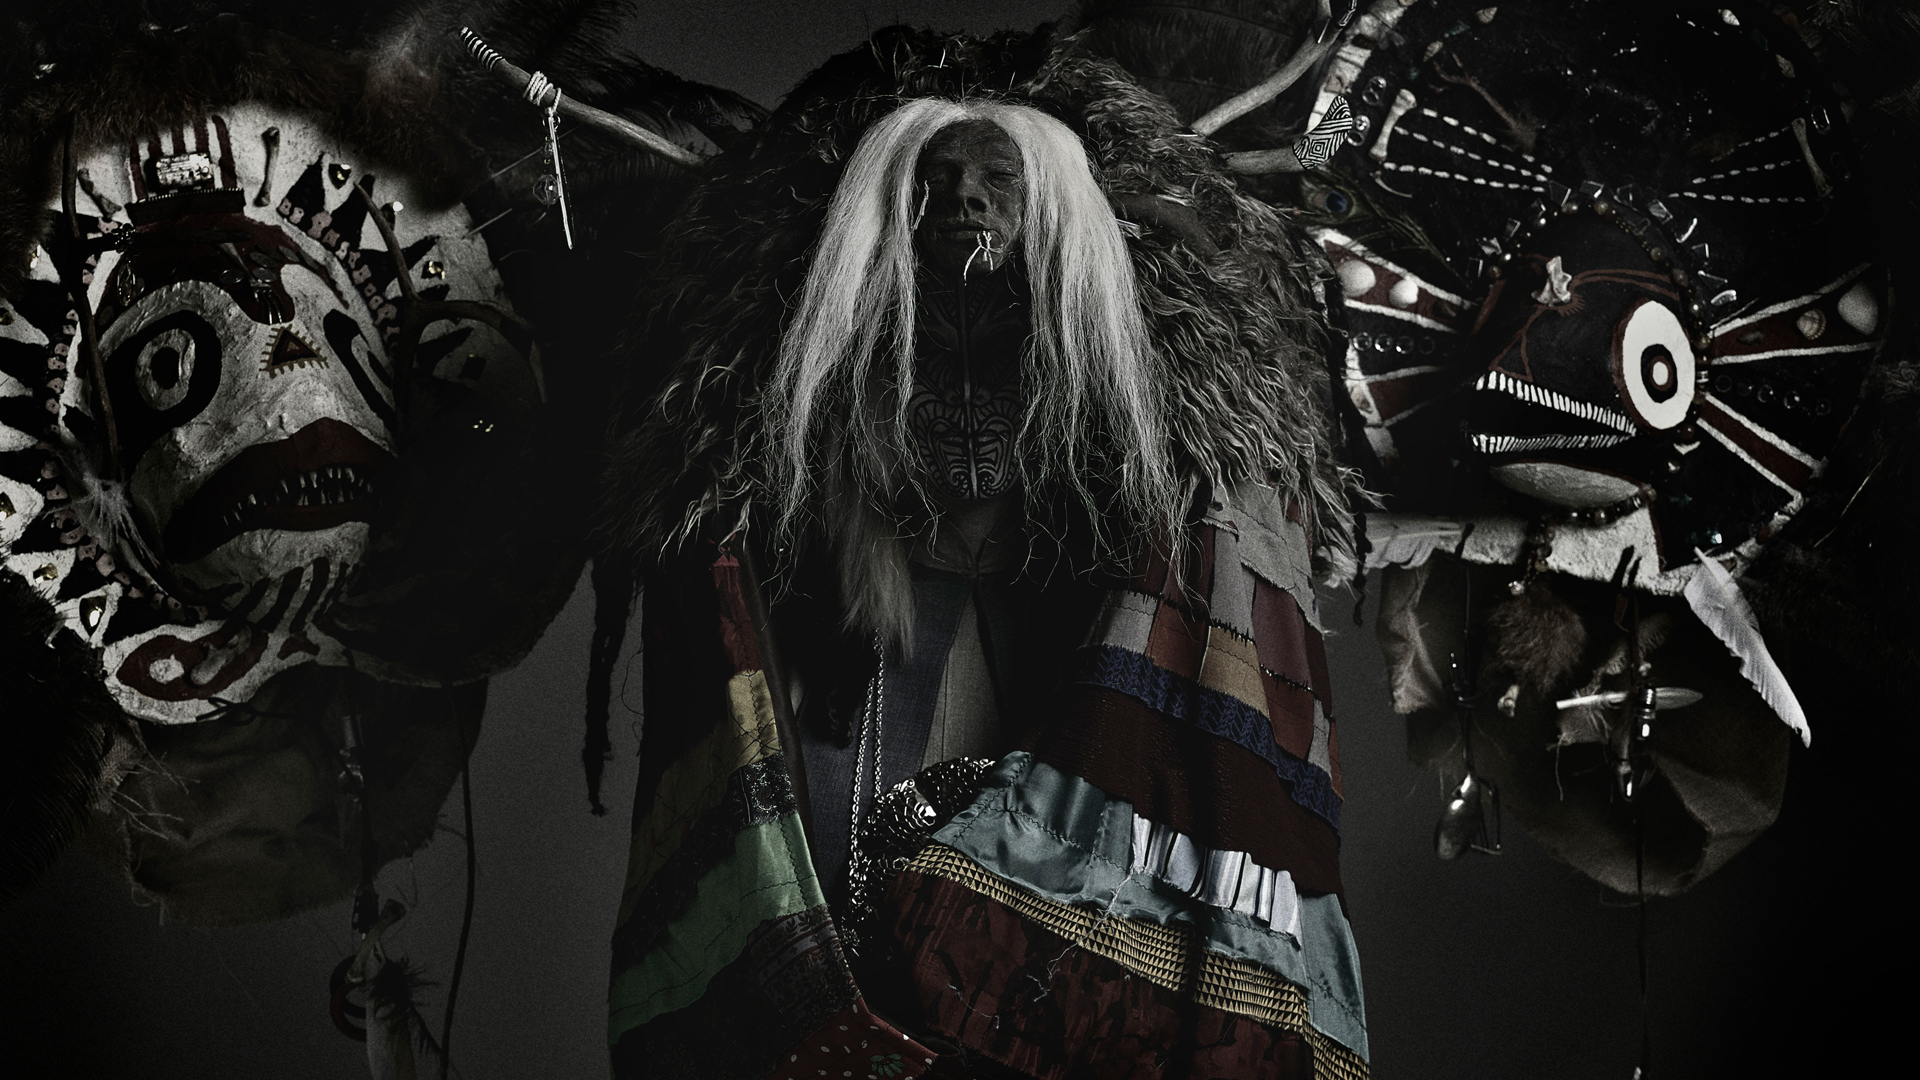 Fever Ray Backgrounds, Compatible - PC, Mobile, Gadgets| 1920x1080 px